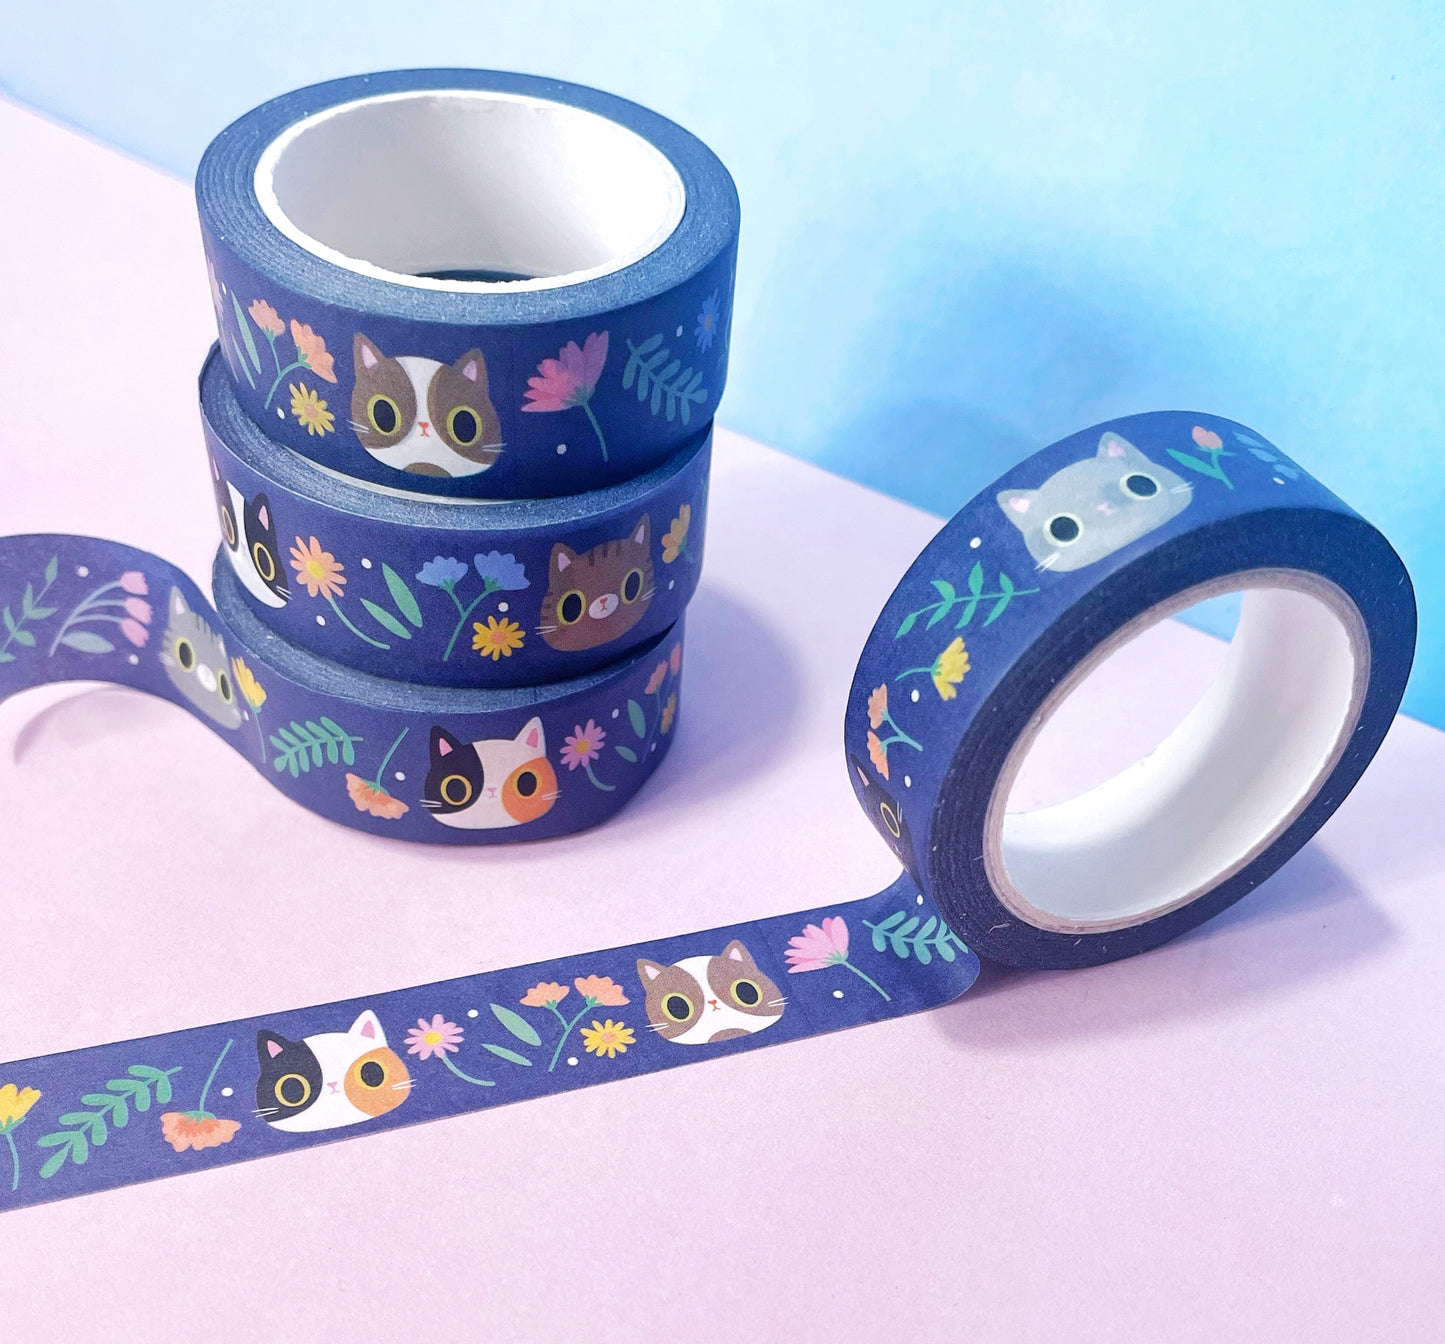 Wildflower Kawaii Washi Tape - Super cute stationery for cat lovers